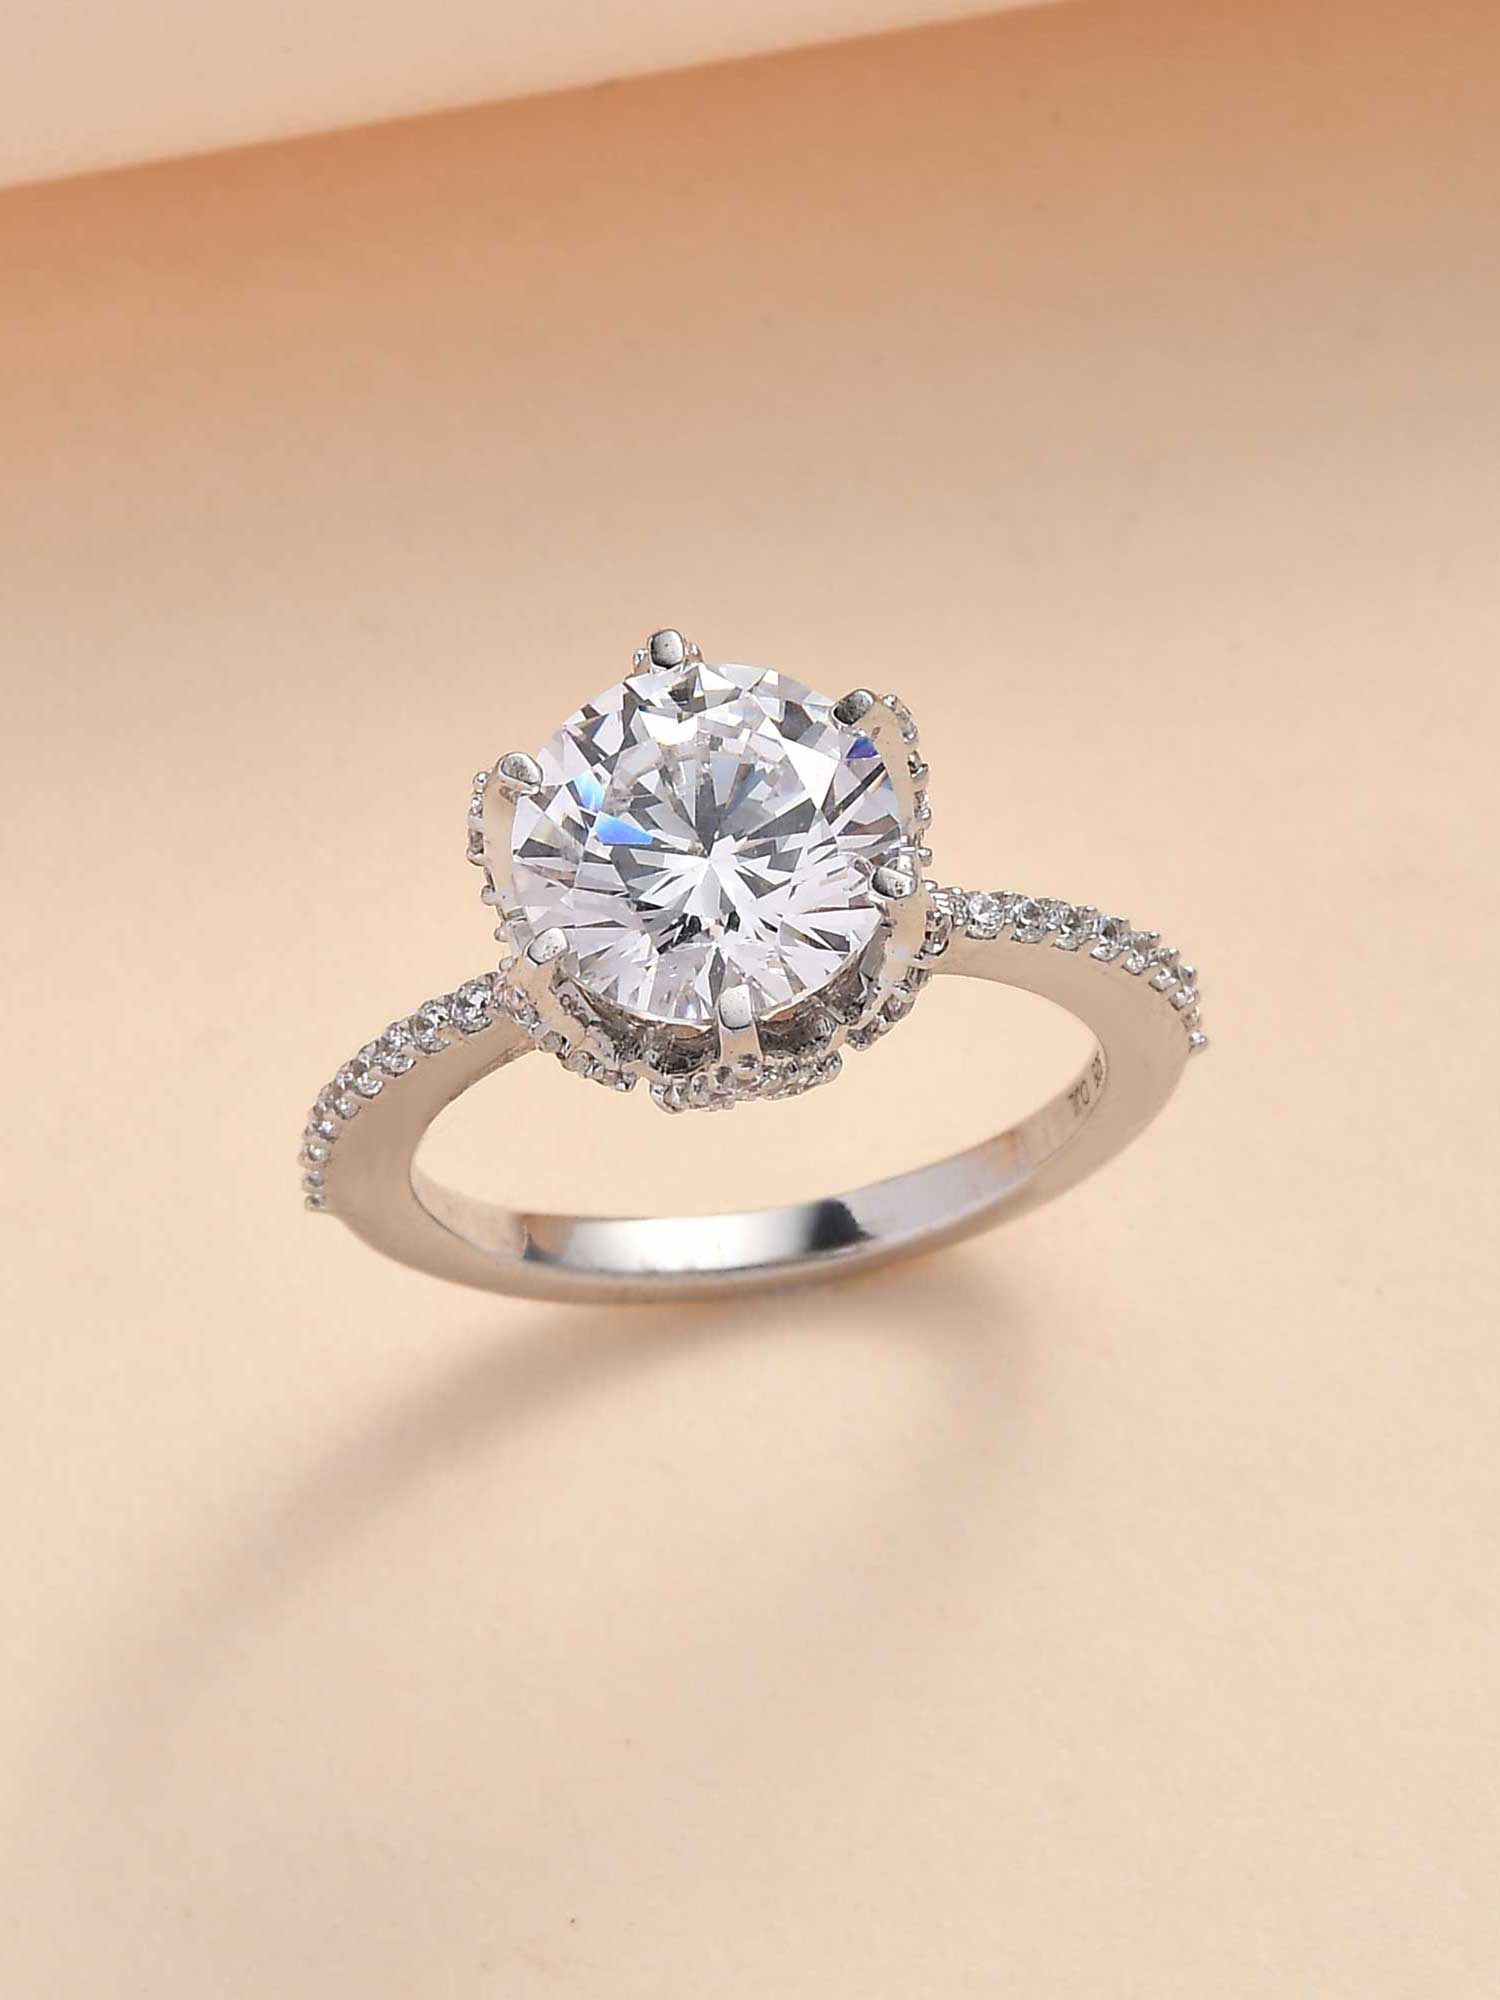 Ornate Jewels 5 Carat Solitaire Ring For Women